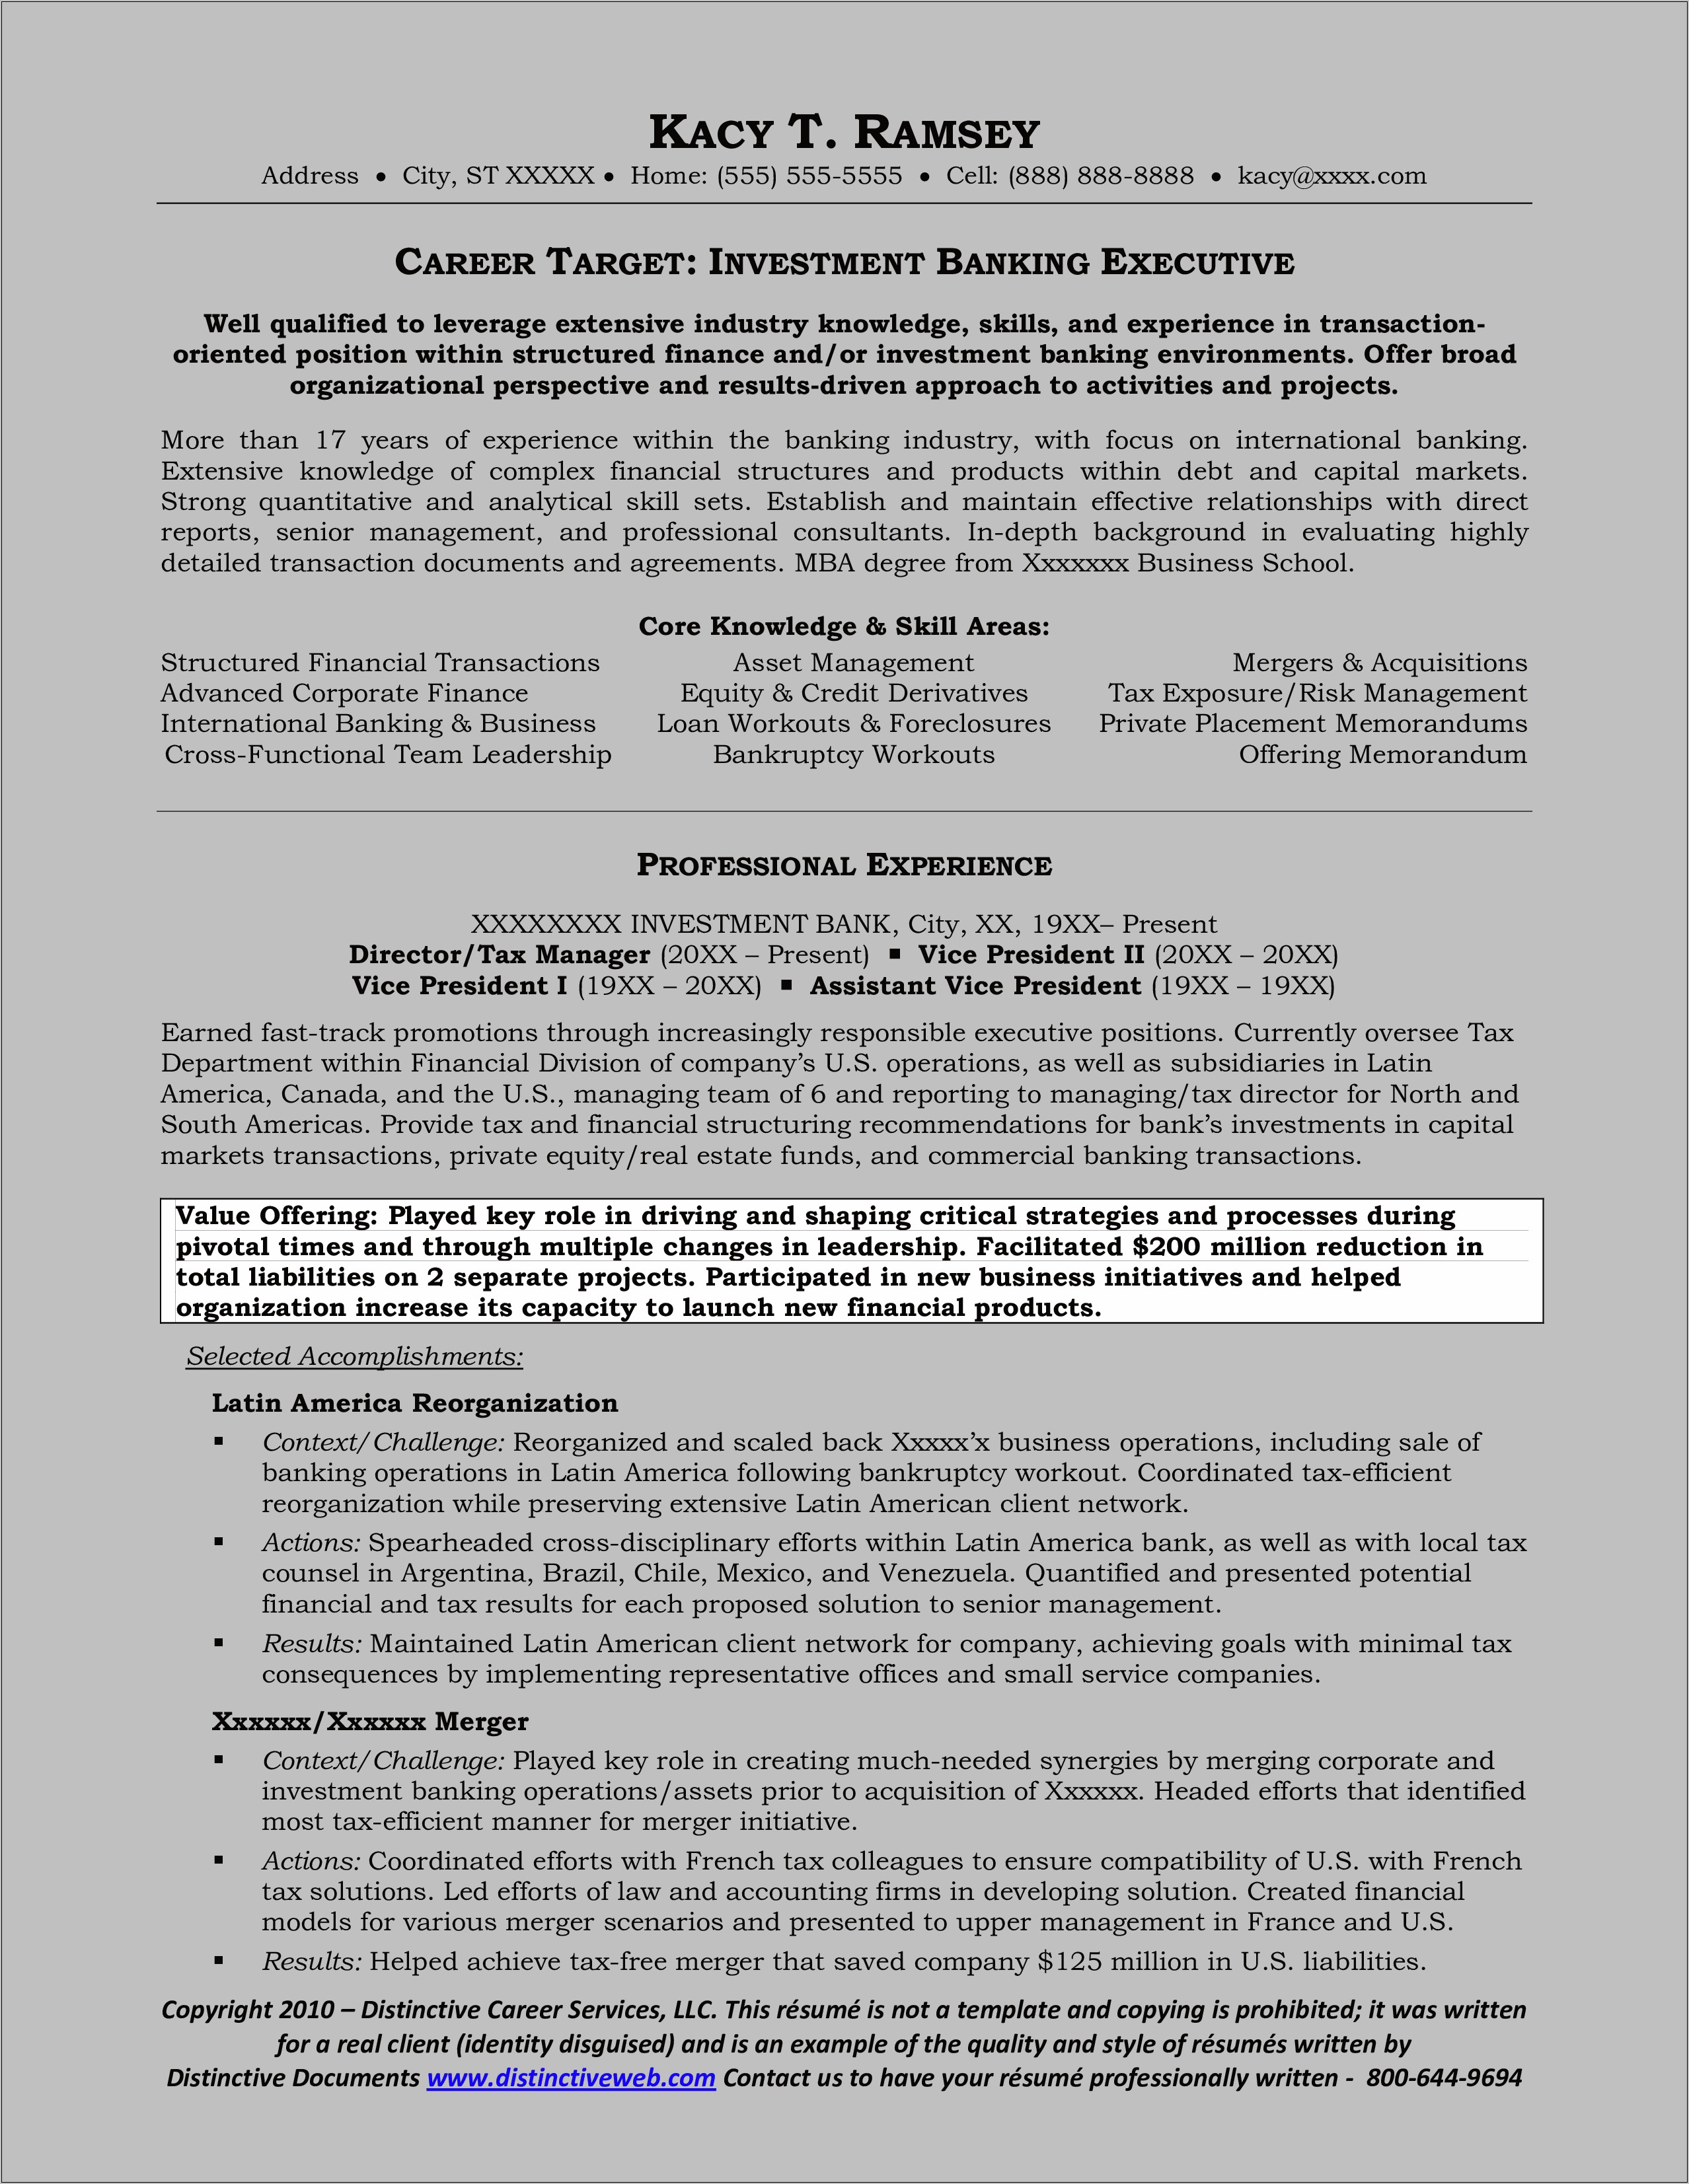 Mba Experienced Investment Banking Resume Template